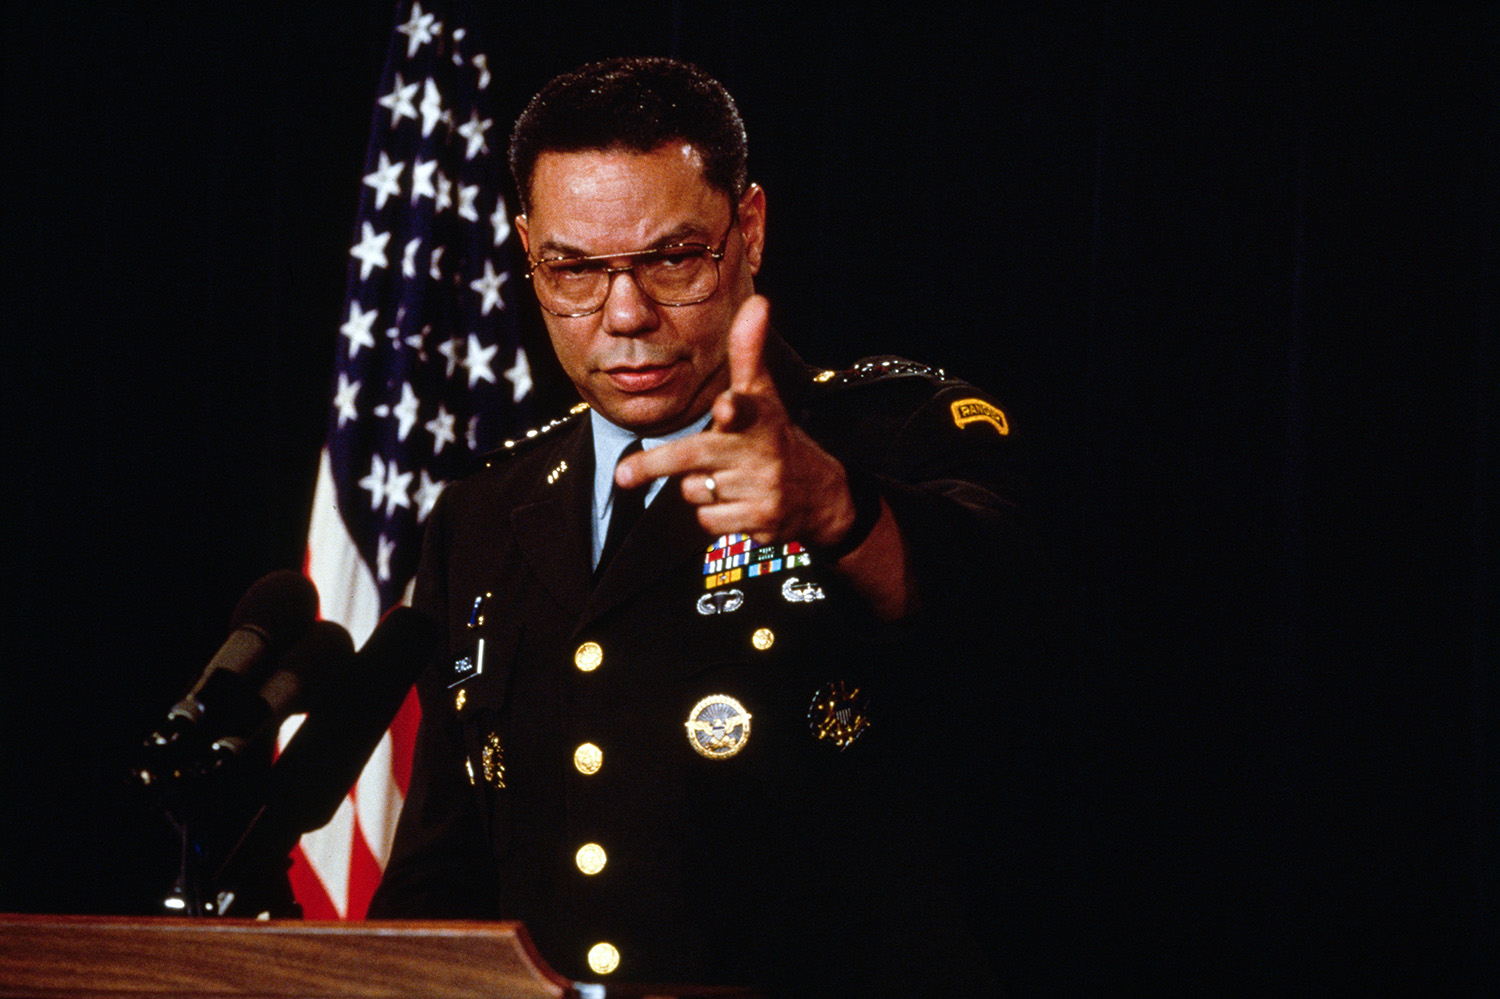 Colin Powell at the Pentagon in 1991. Rick Maiman/Sygma via Getty Images.
